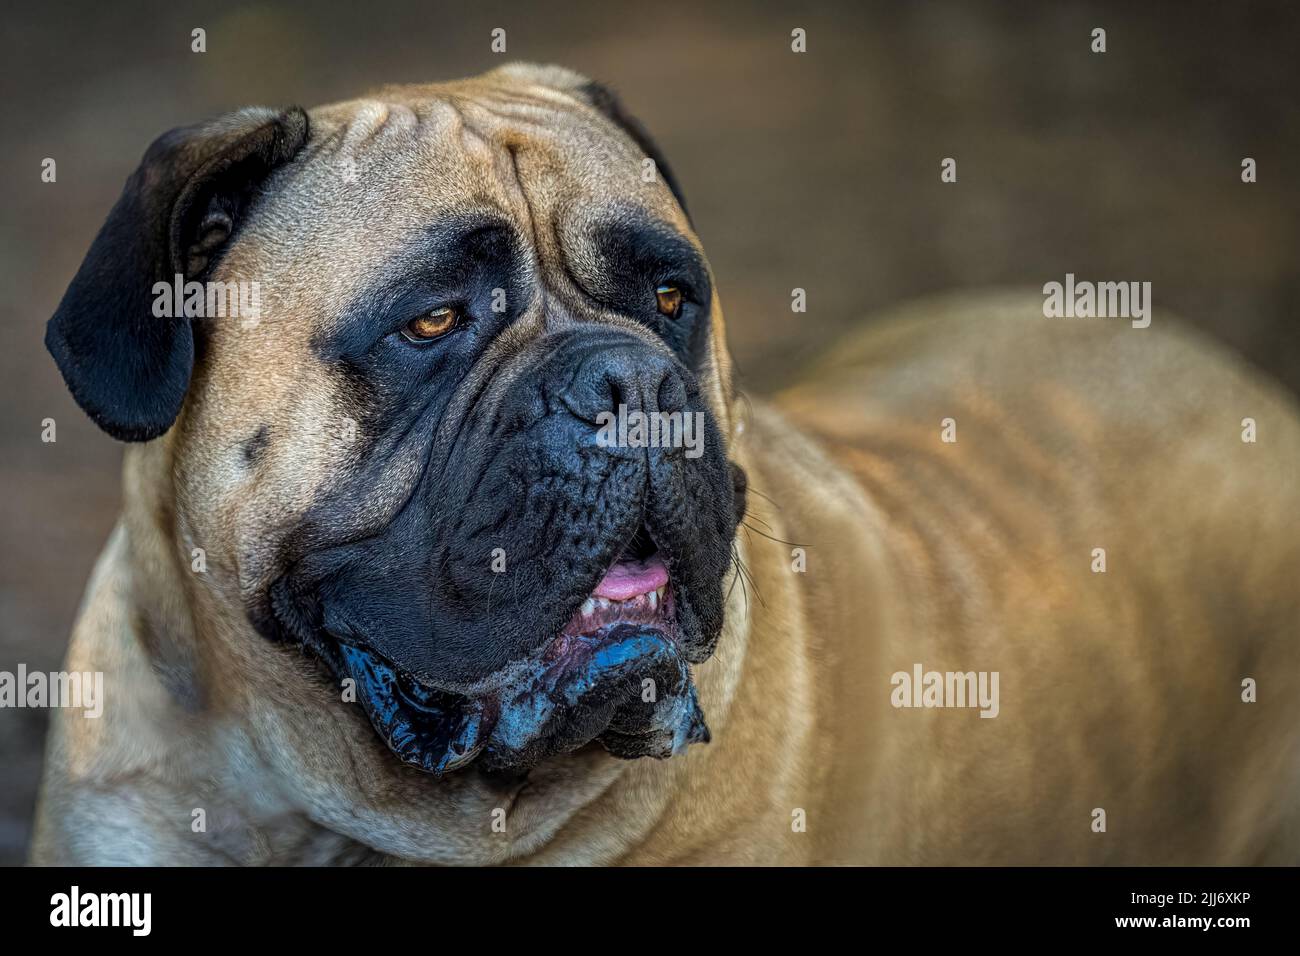 LARGE BULLMASTIFF LYING ON THE GROUND WITH STUNNING EYES WITH A BLURRY BODY AND BACKGROUND AT A OFF-LEASH ARA IN REDMOND WASHINGTON. Stock Photo